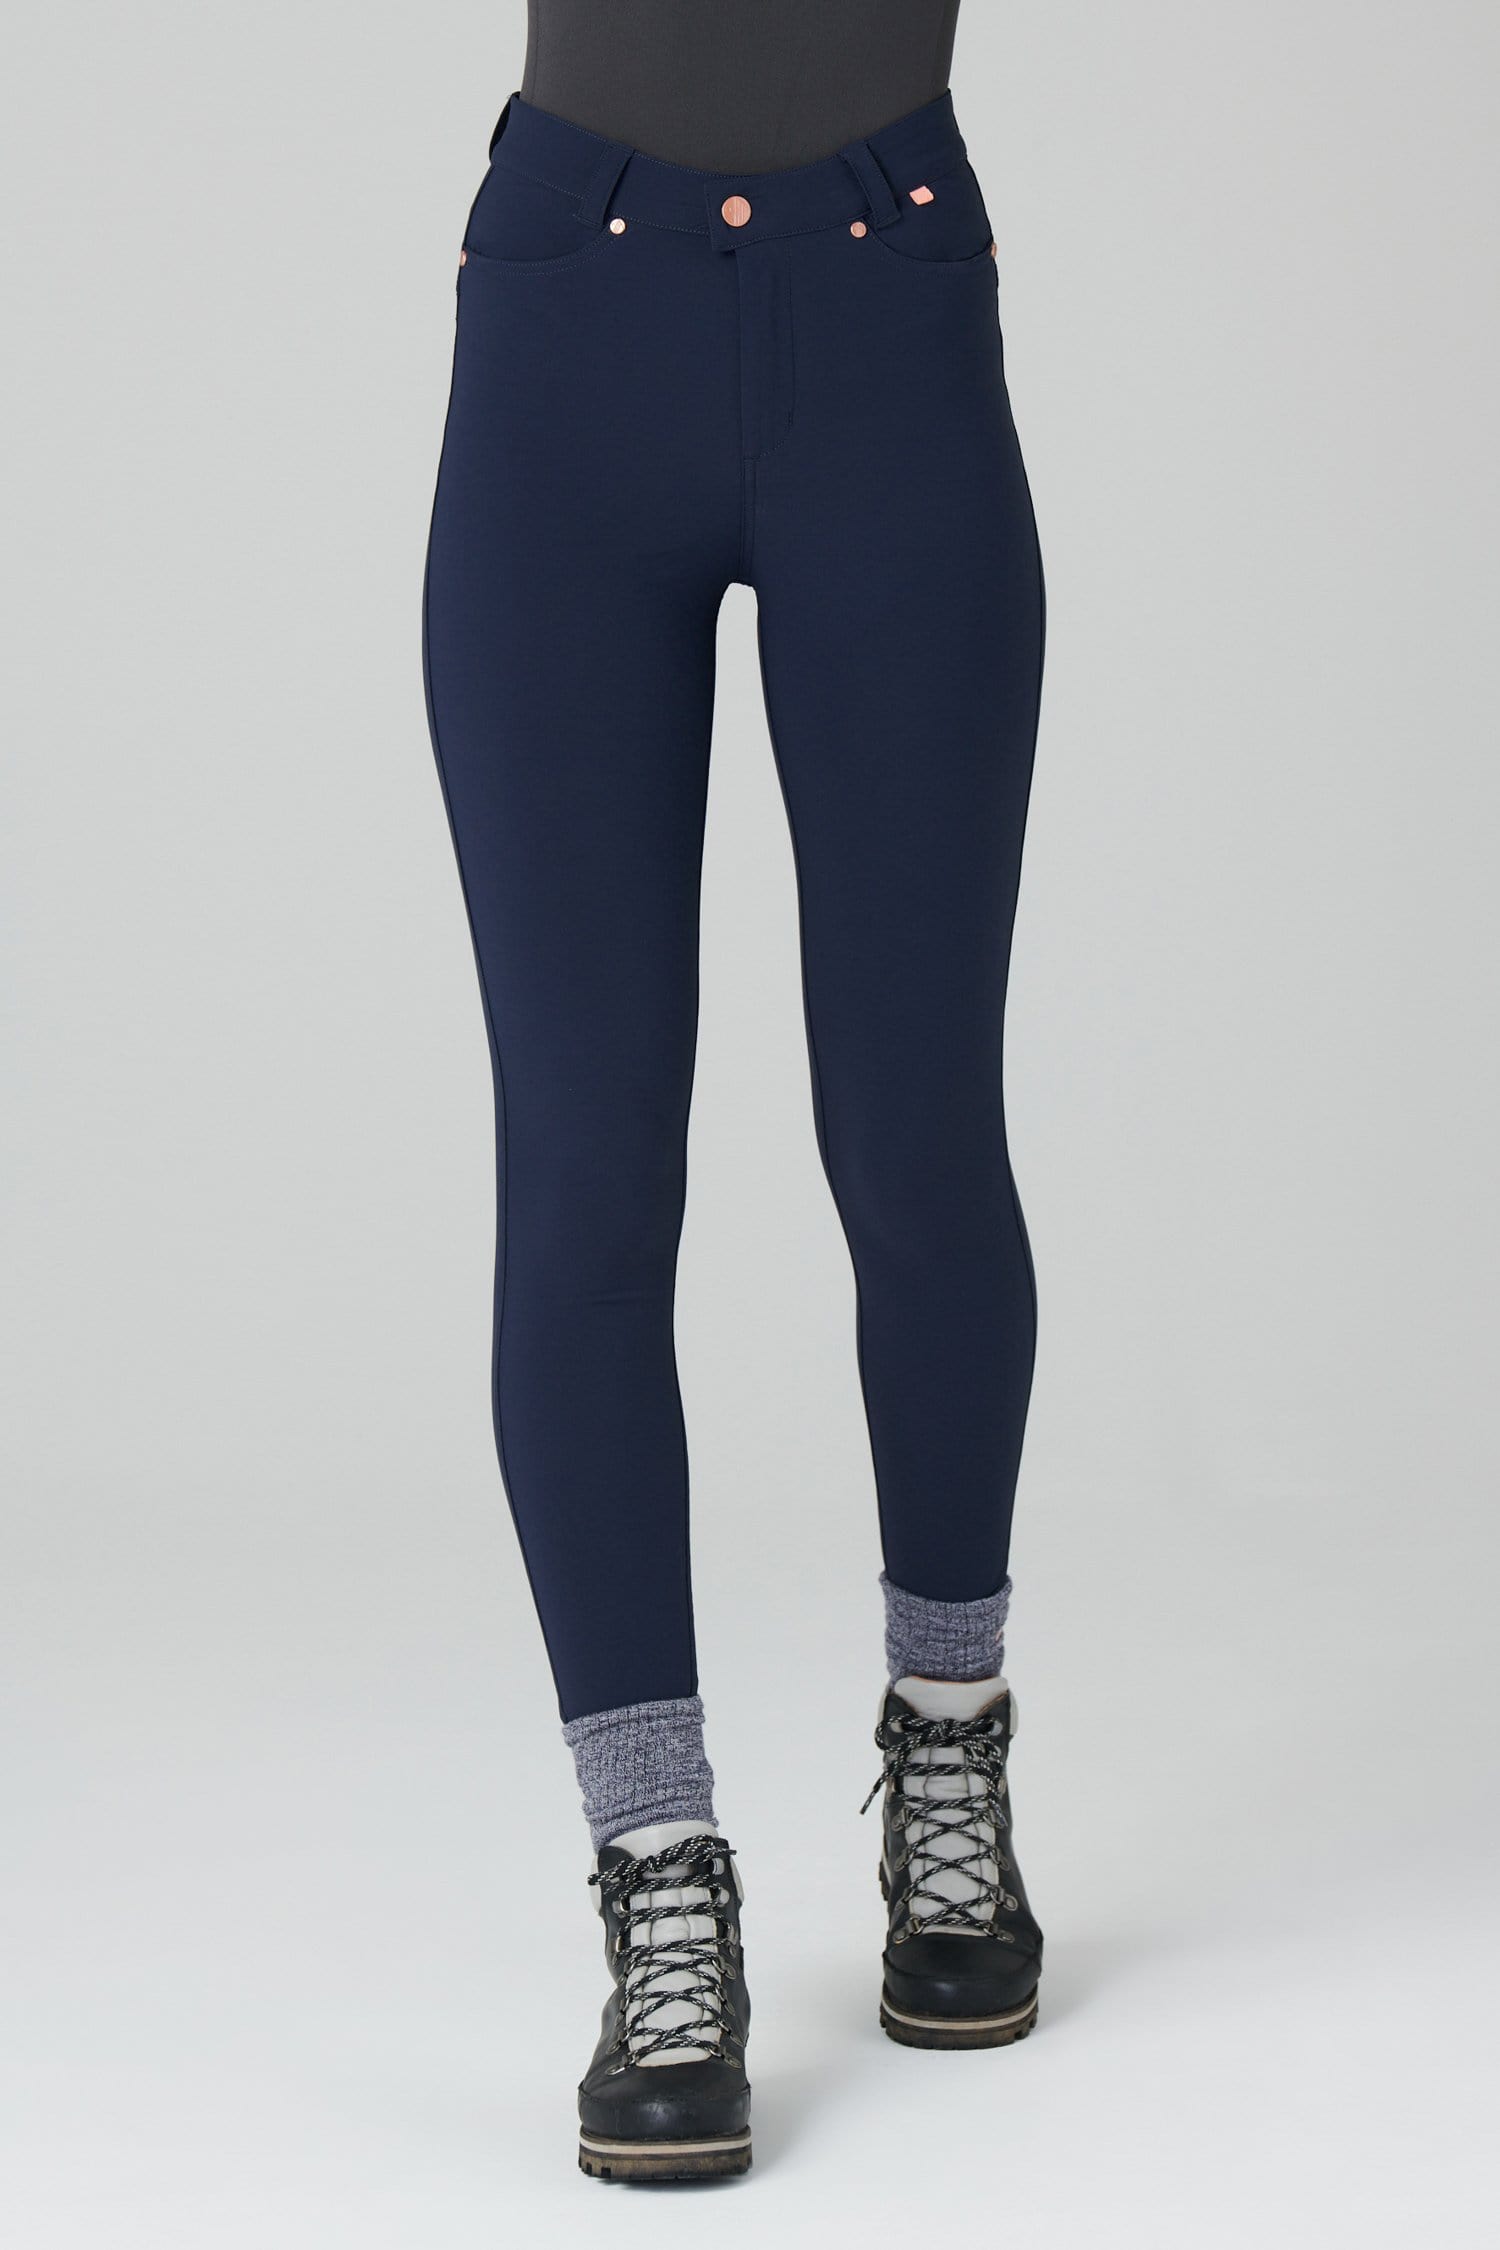 Max Stretch Skinny Outdoor Trousers - Deep Navy - 30p / Uk12 - Womens - Acai Outdoorwear